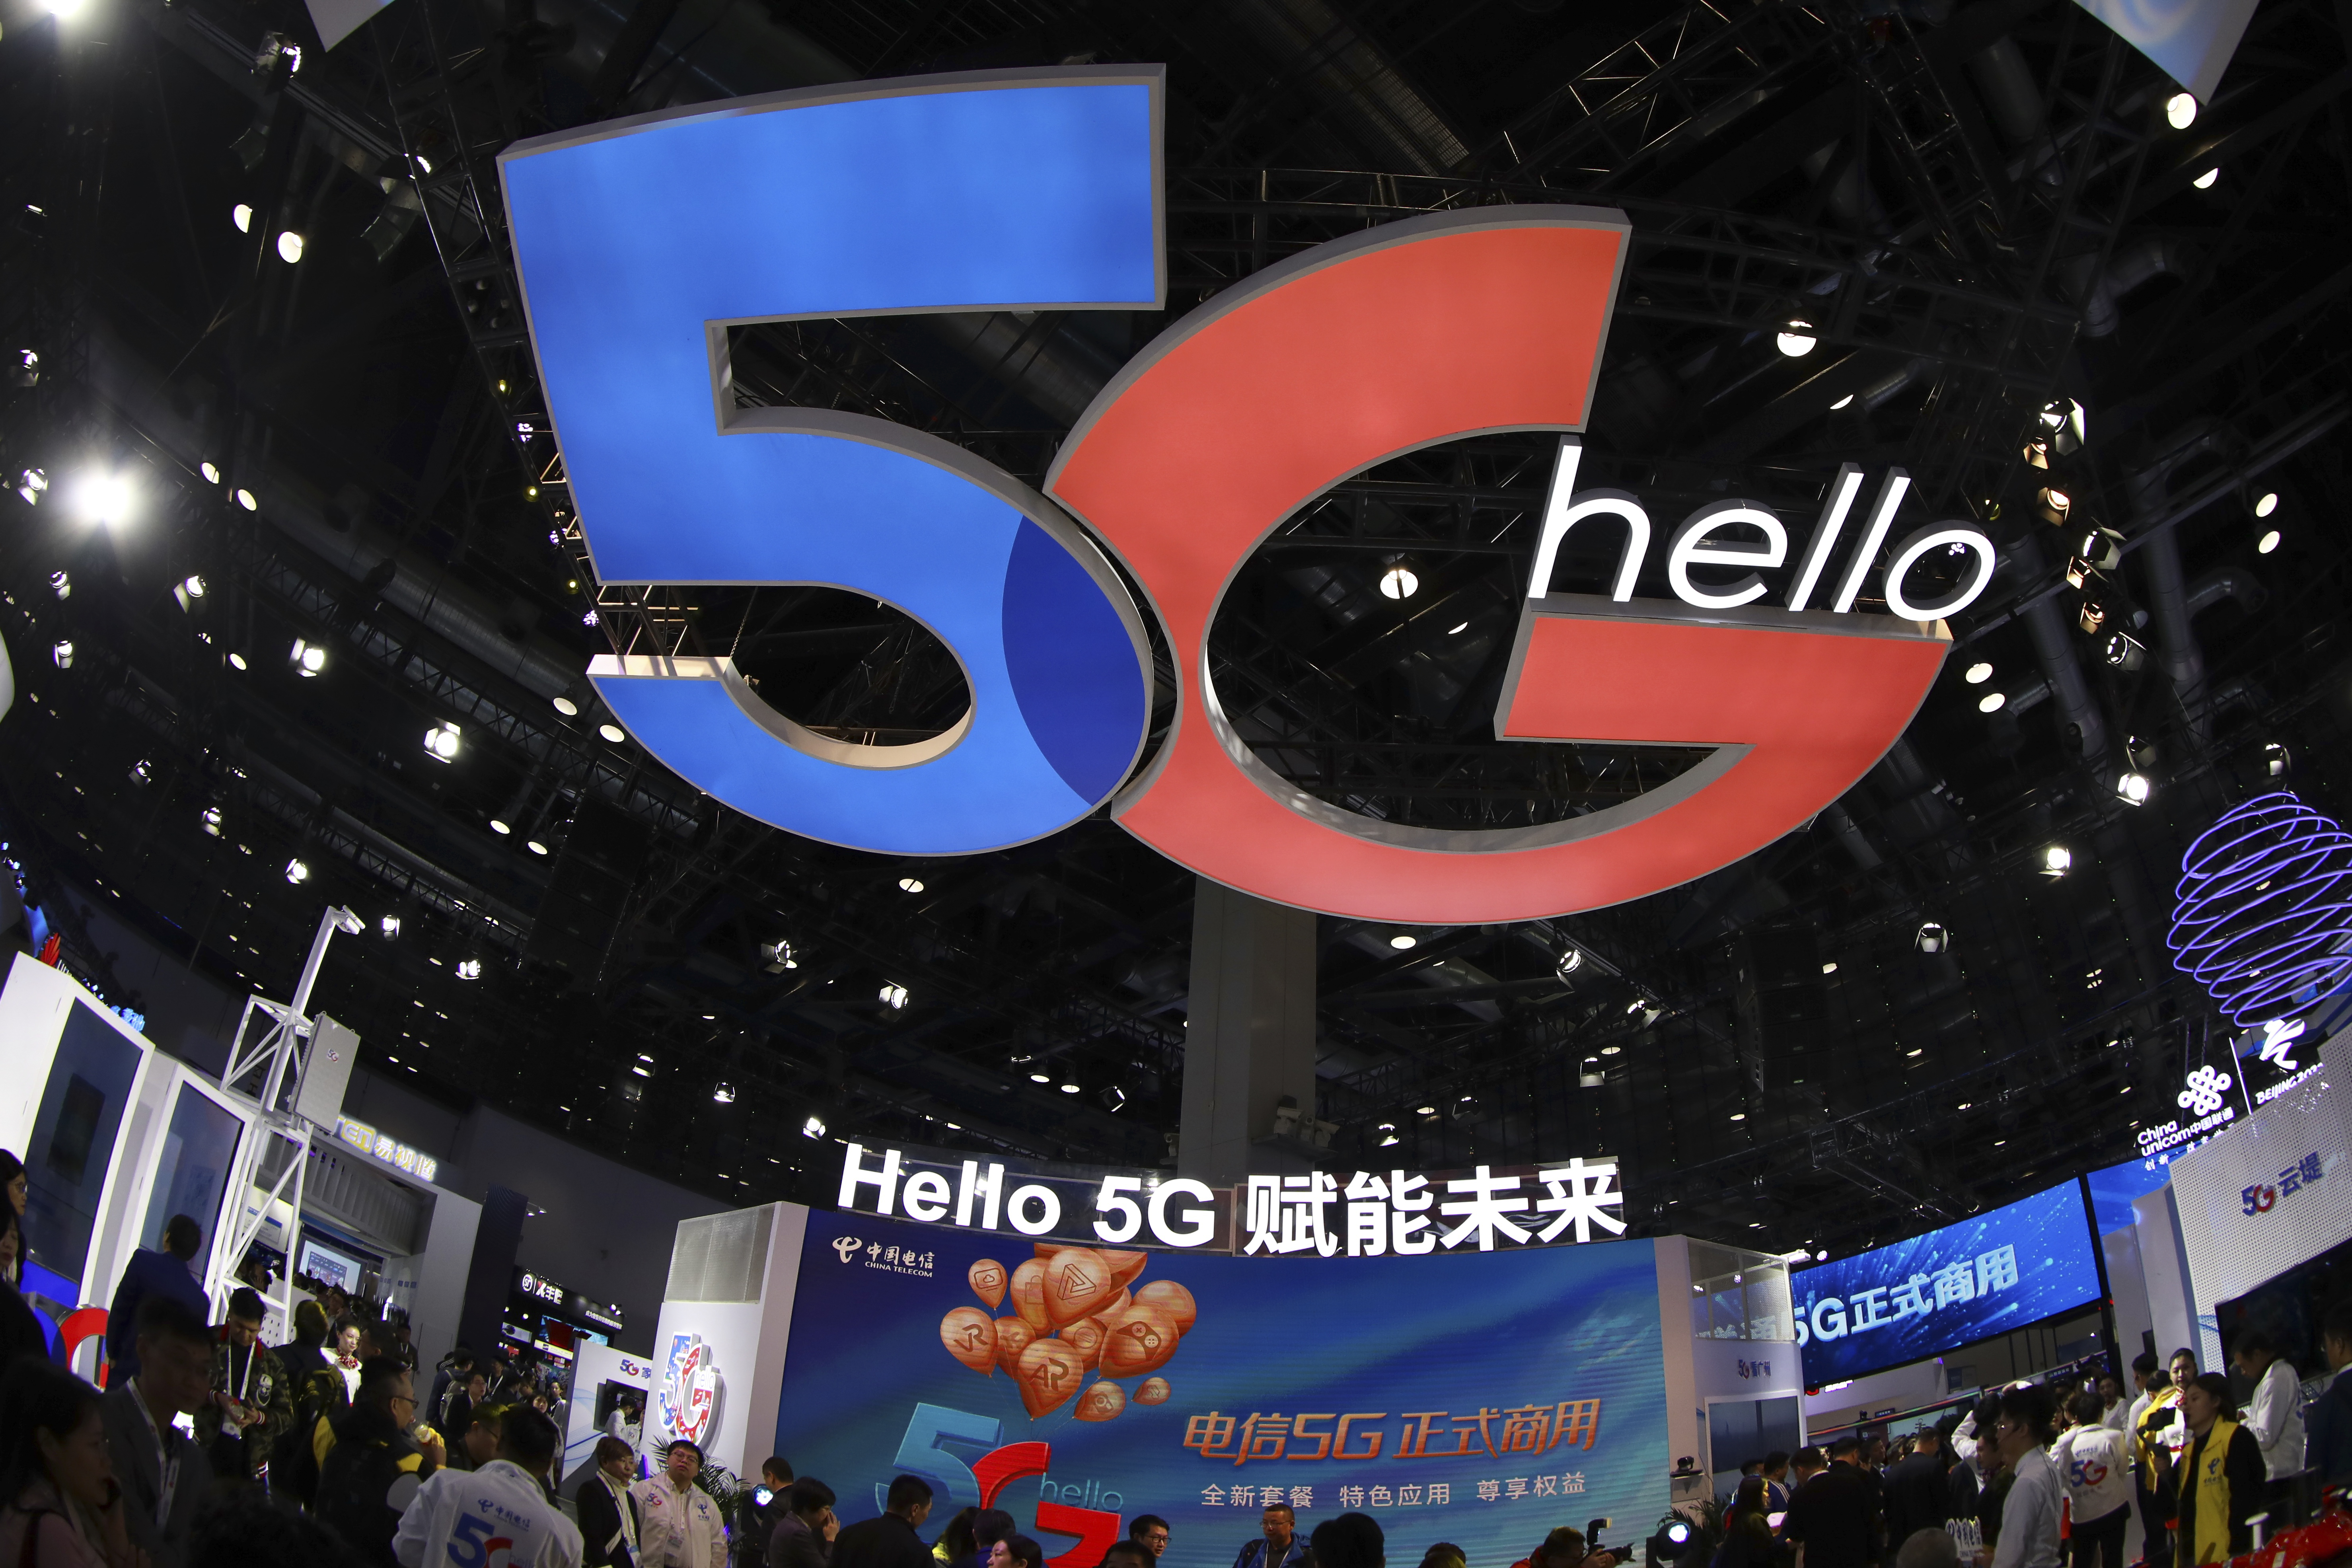 Commercial 5G networks are now live in China for as little as US$18. (Picture: Imaginechina)